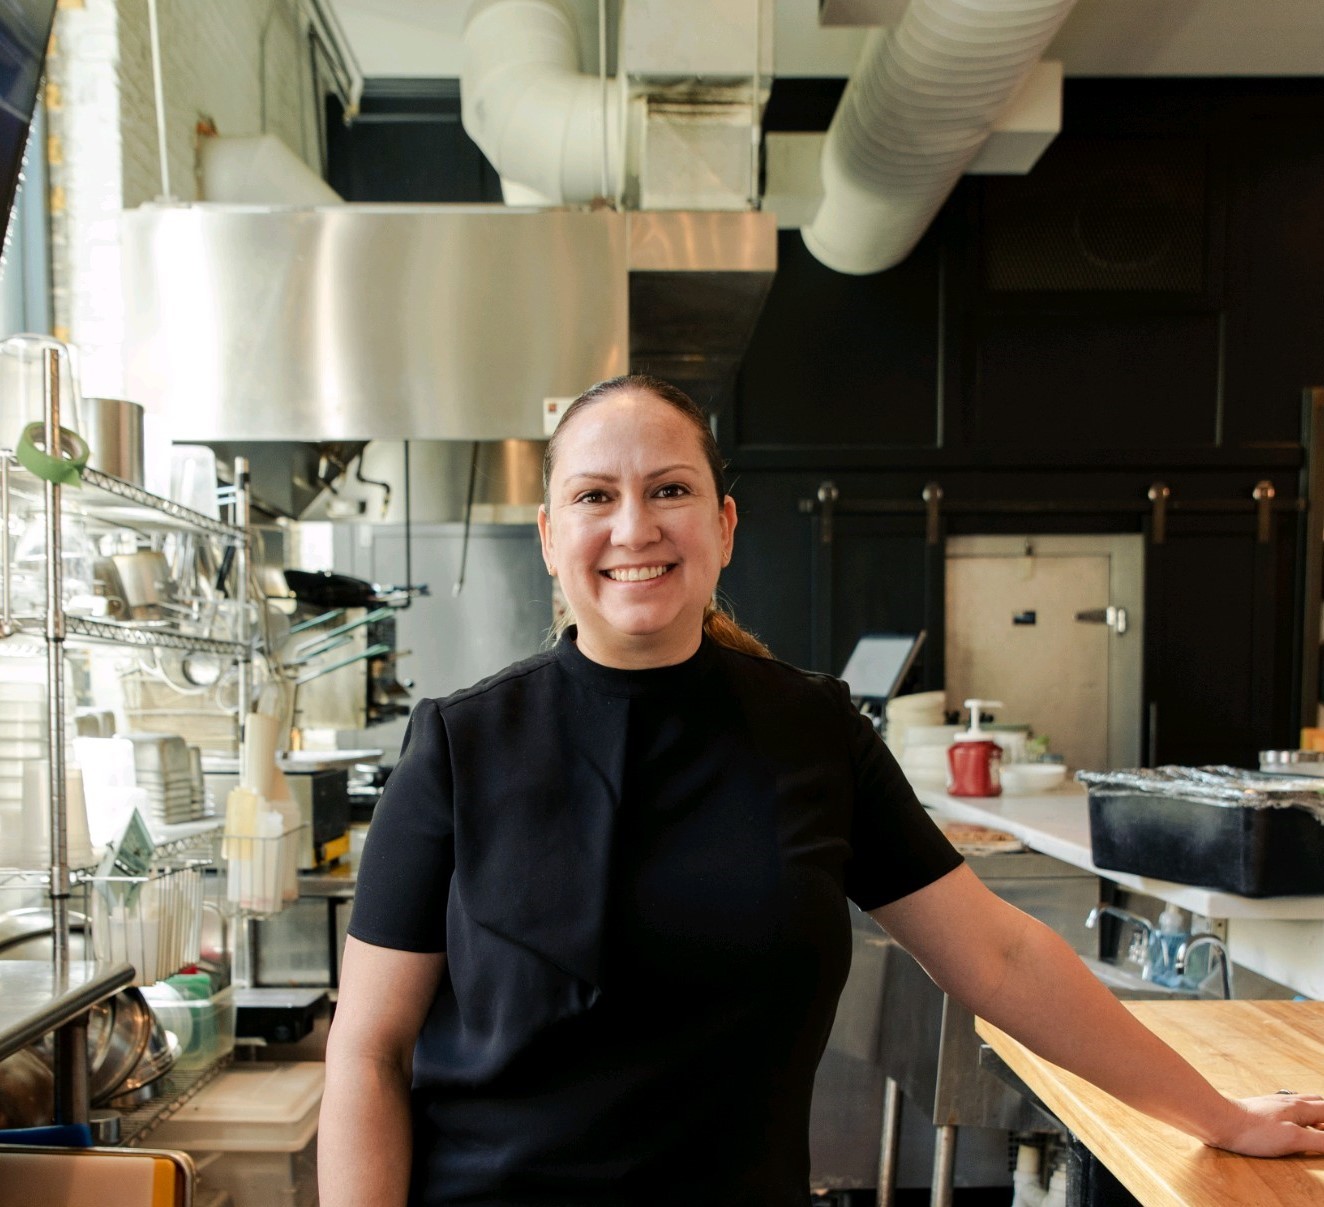 Rosana Rivera, a trained chef and owner of Xilo, a Mexican-inspired restaurant in Tampa. Courtesy photo.